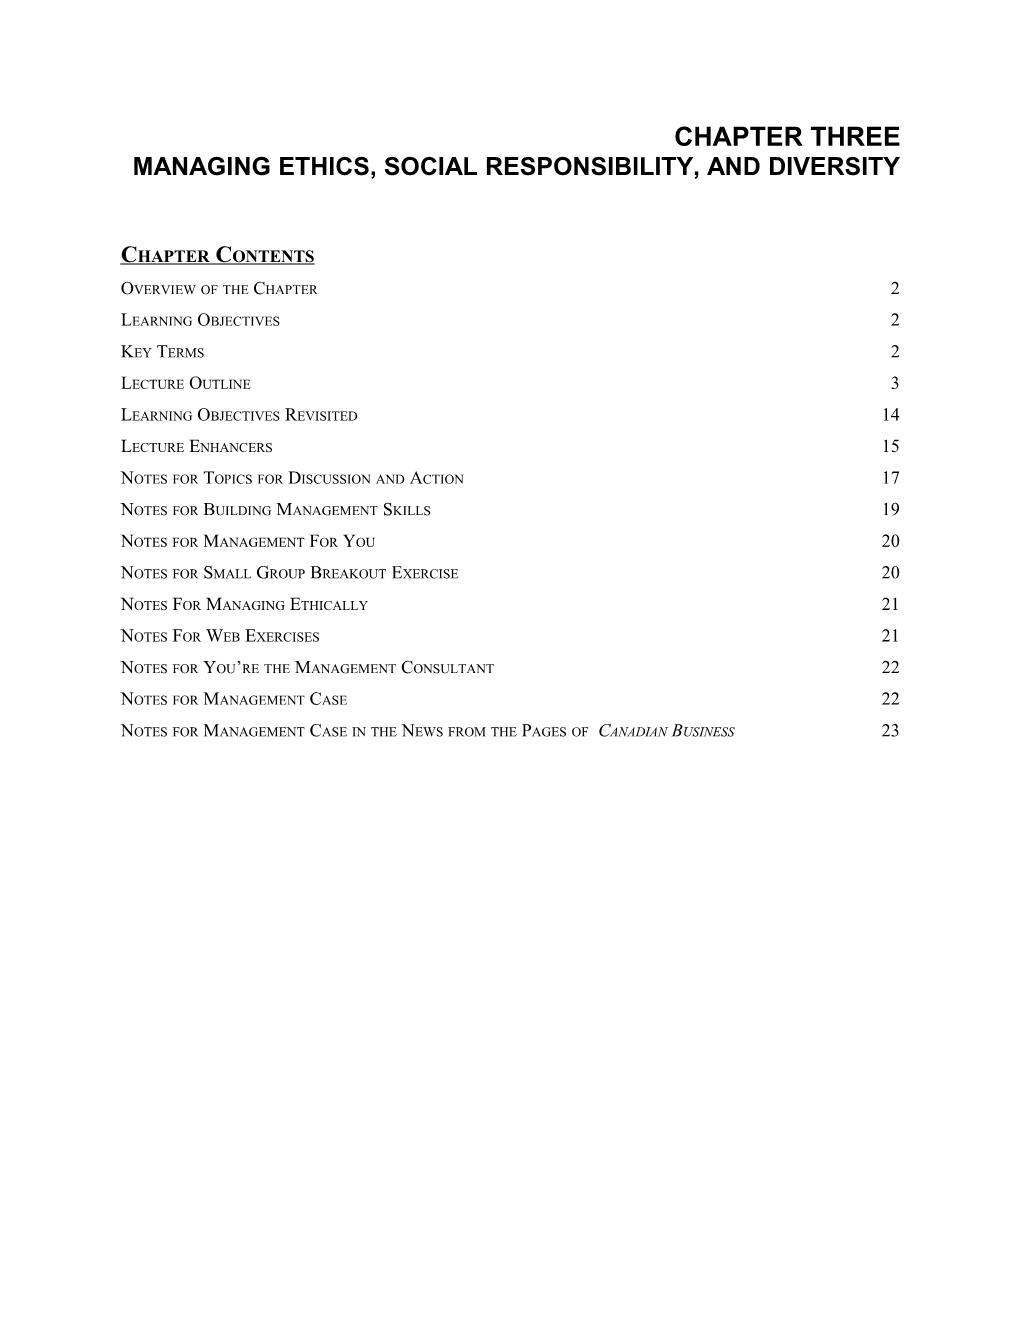 Managing Ethics, Social Responsibility, and Diversity